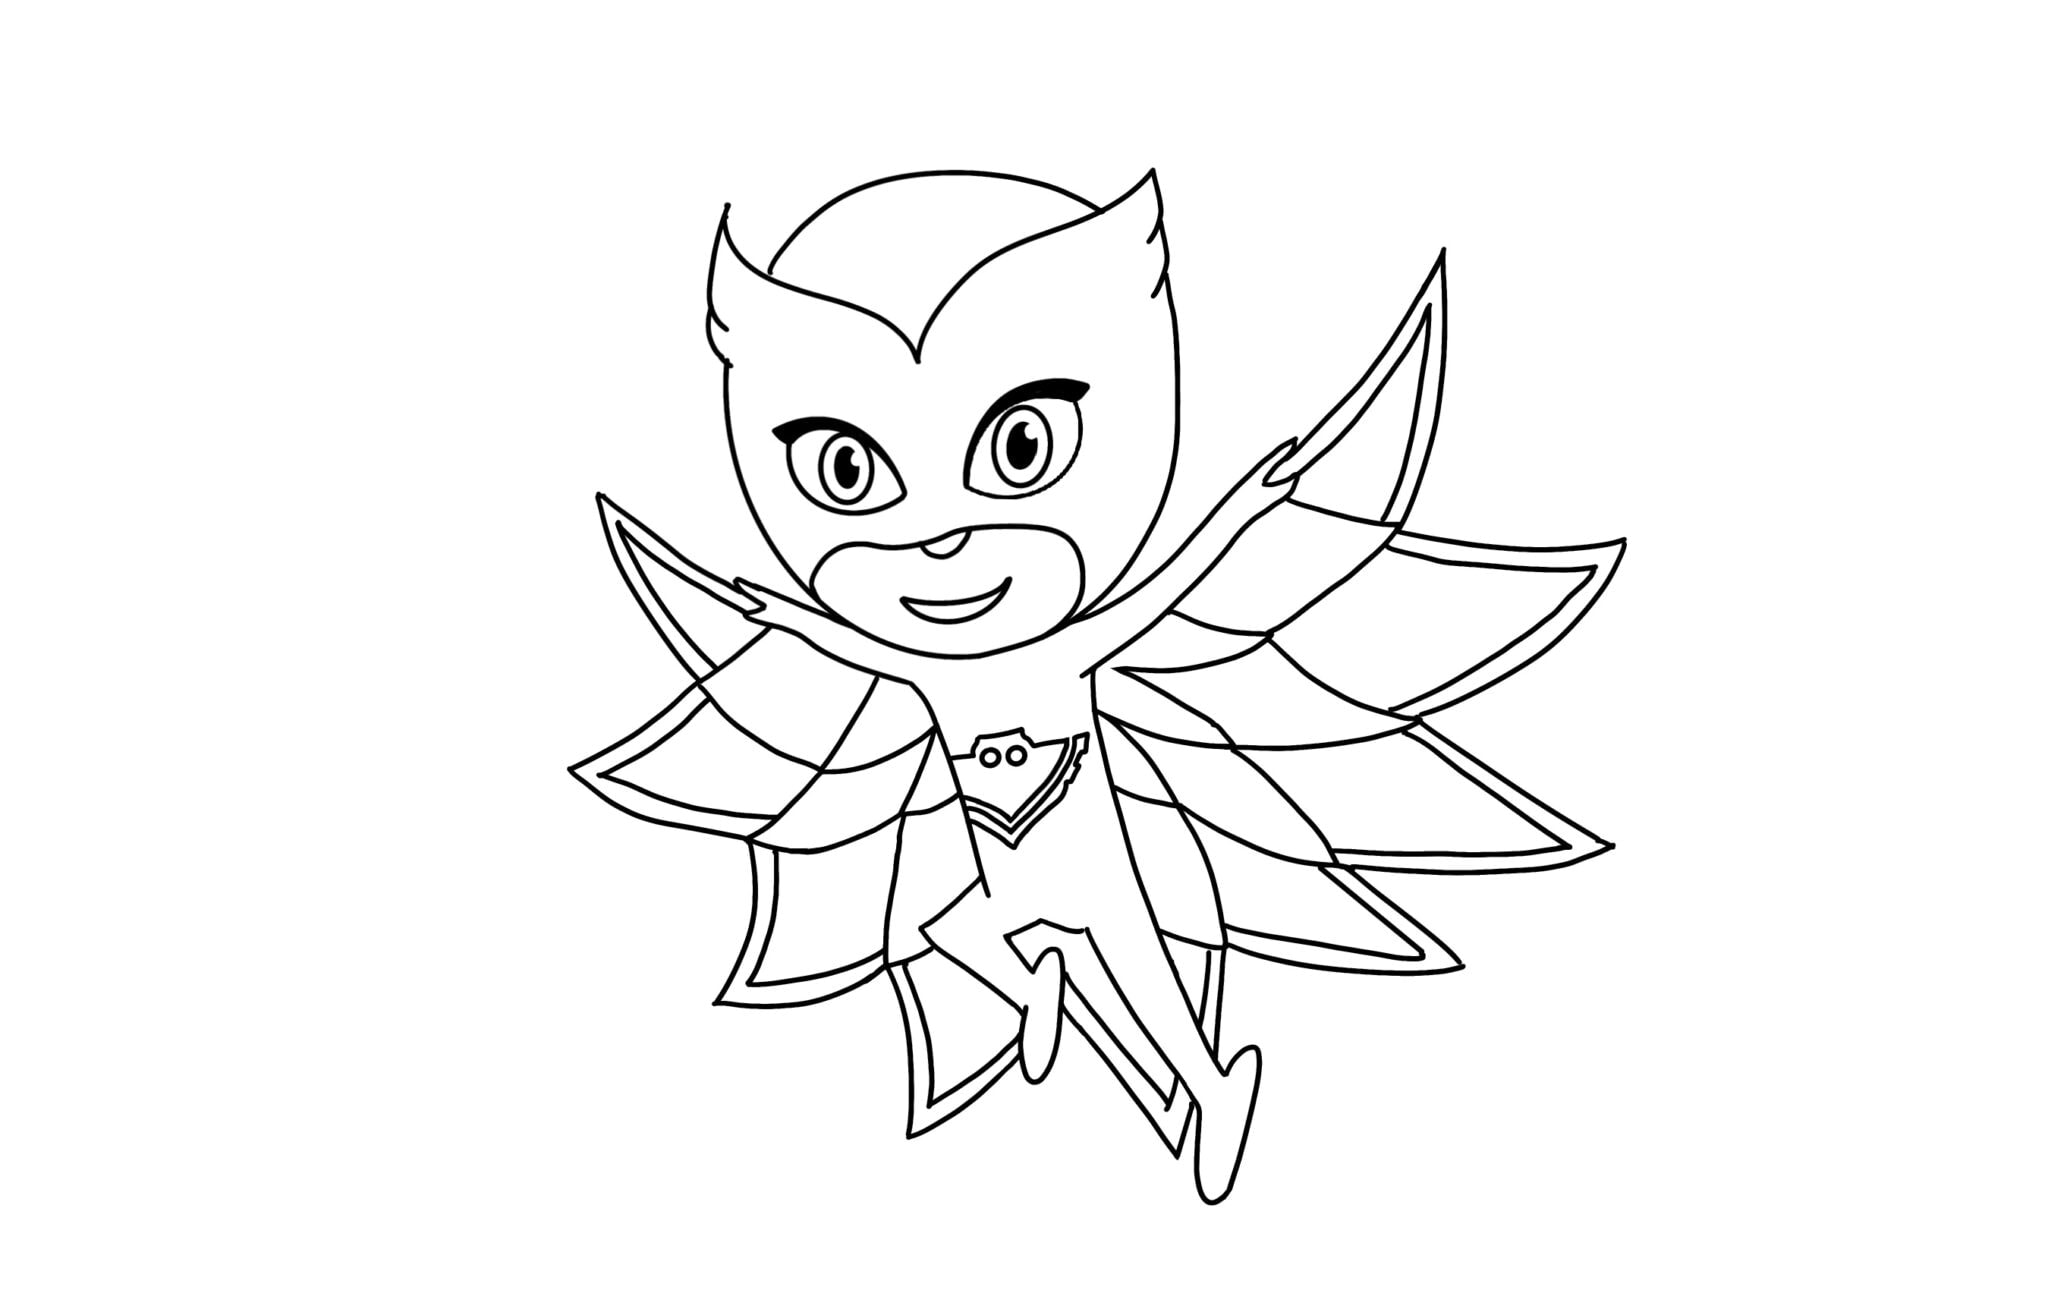 PJ Masks Coloring Pages (and colored paper) - Ioanna Ladopoulou – Art ...